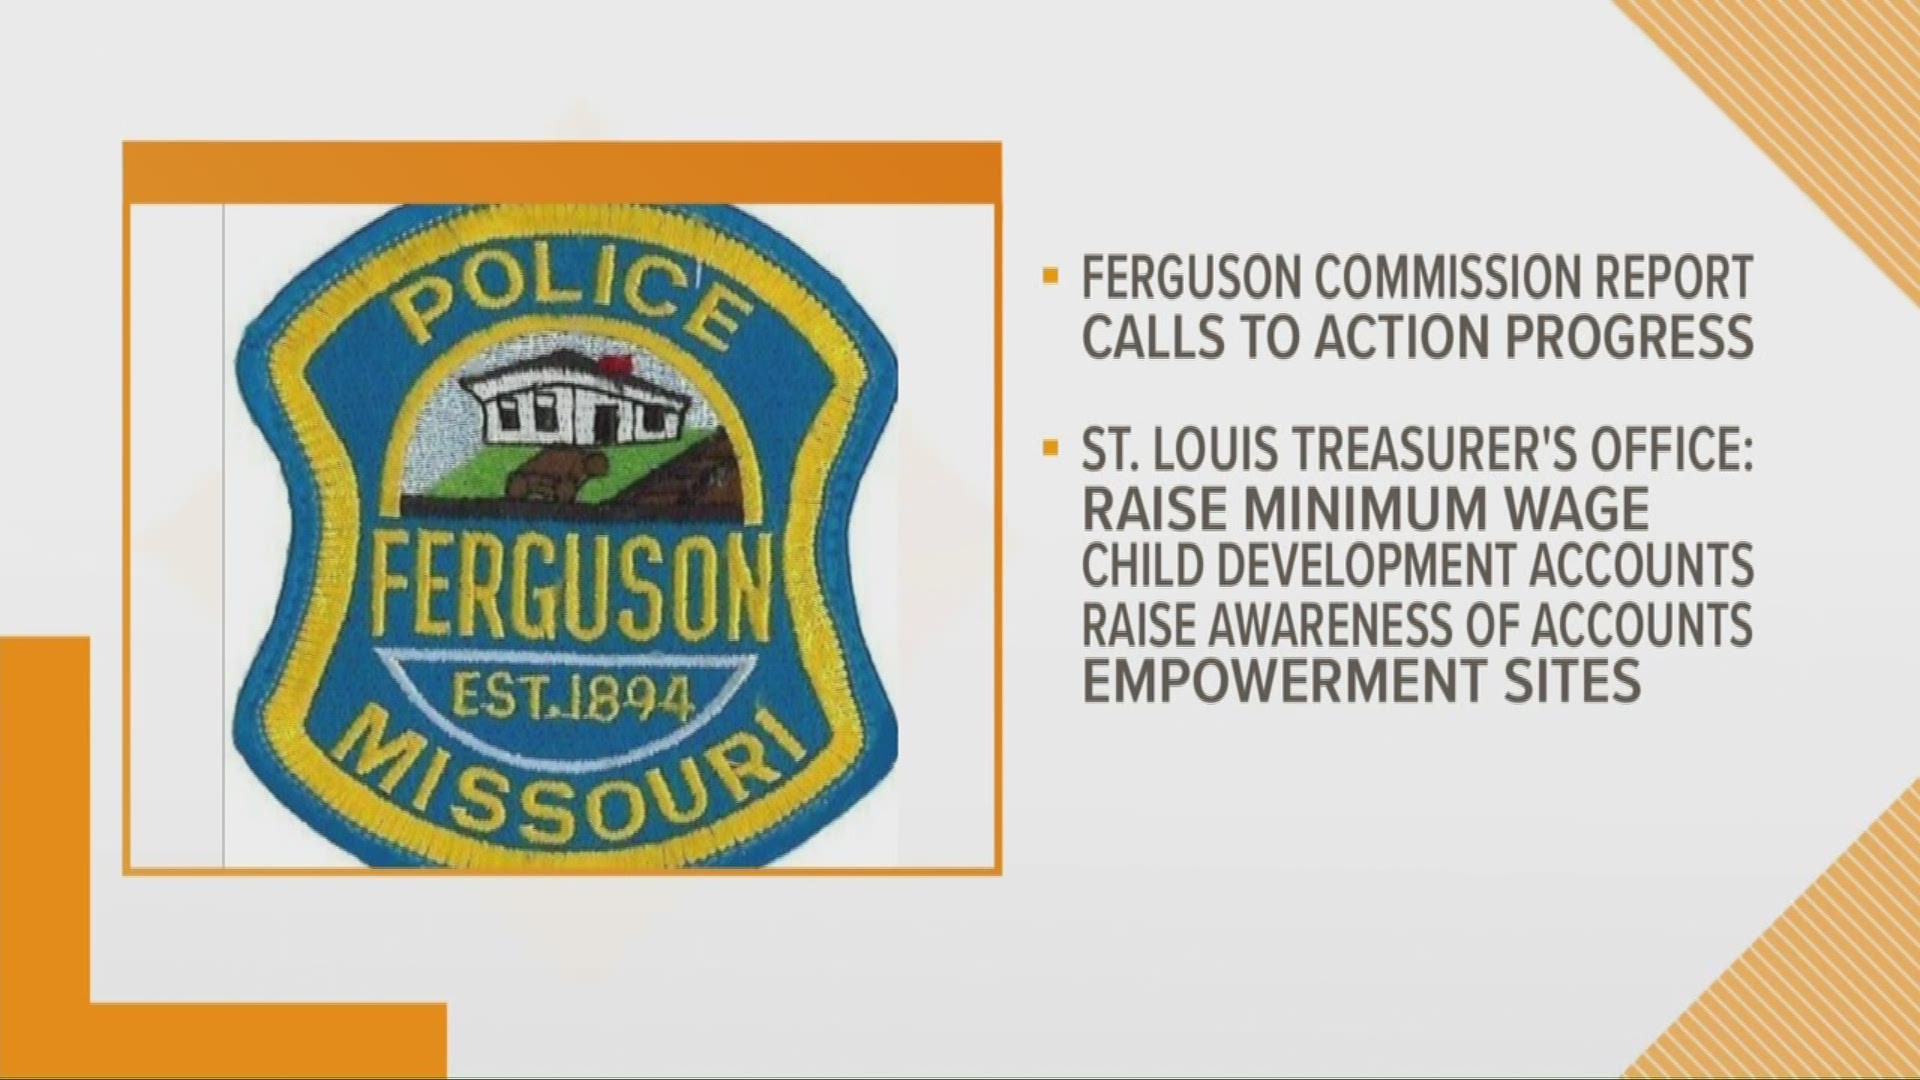 4 Ferguson calls to action implemented, St. Louis treasurer says